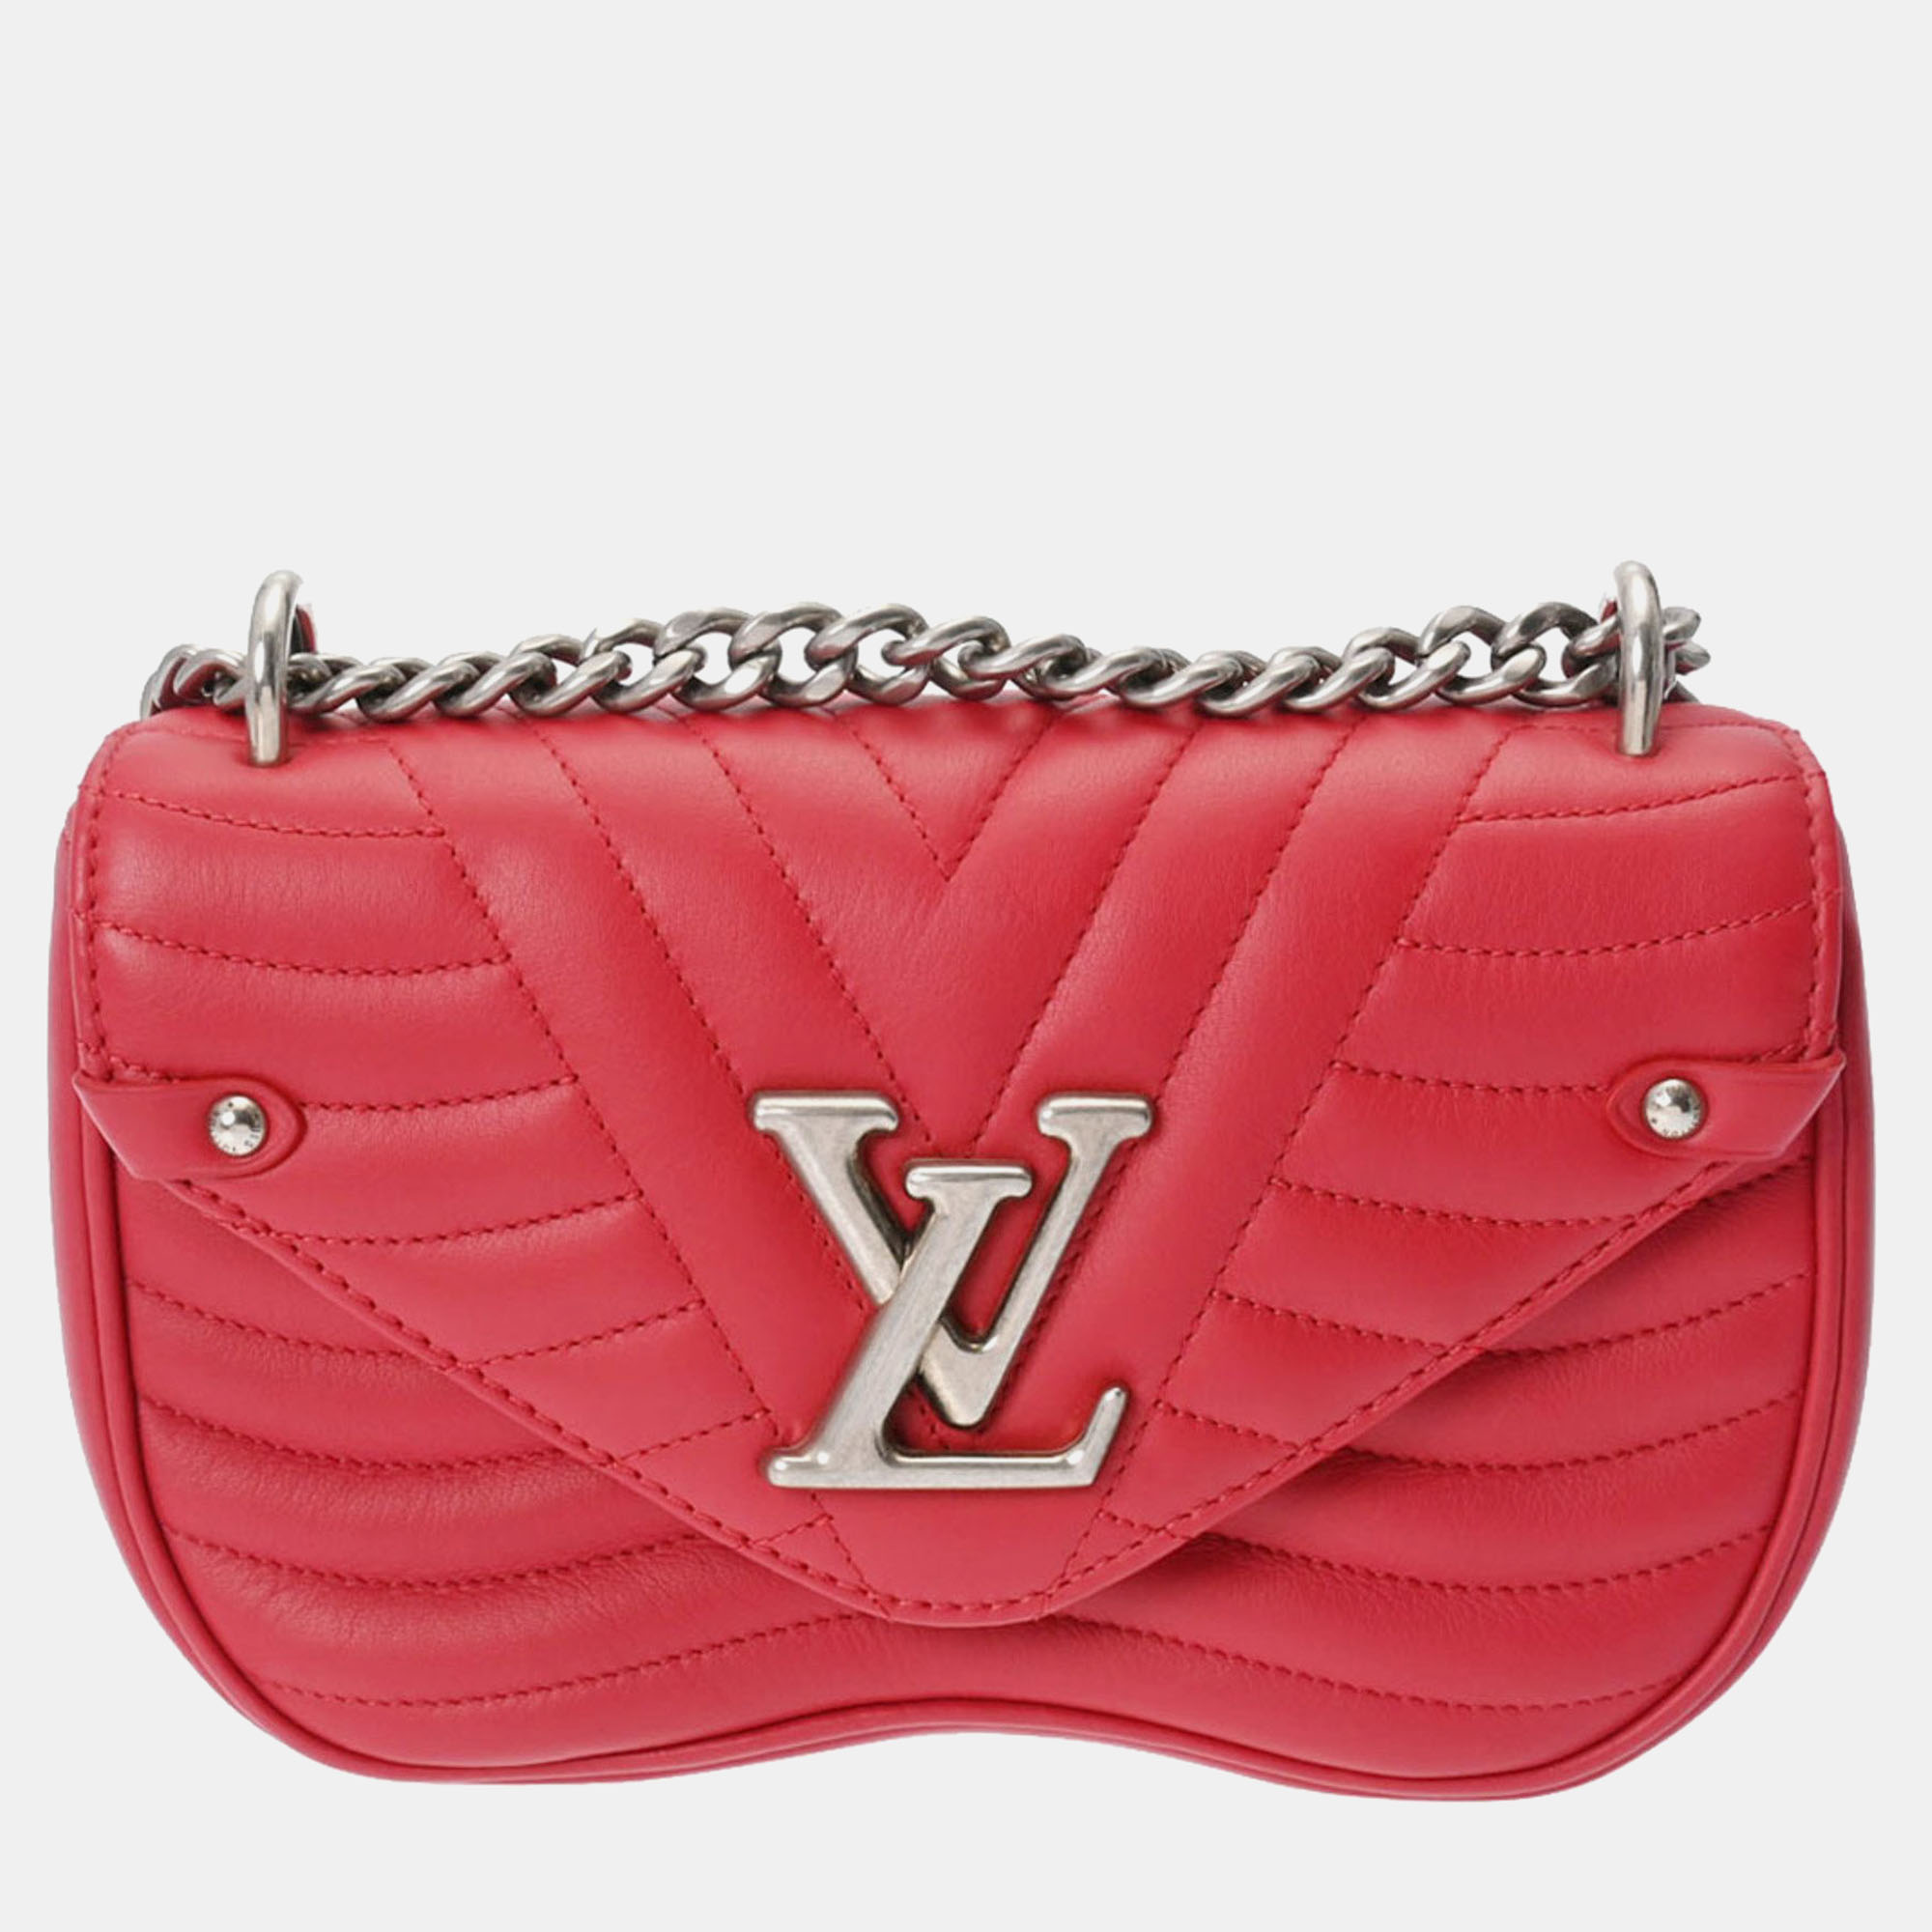 Louis vuitton red leather new wave chain shoulder bag